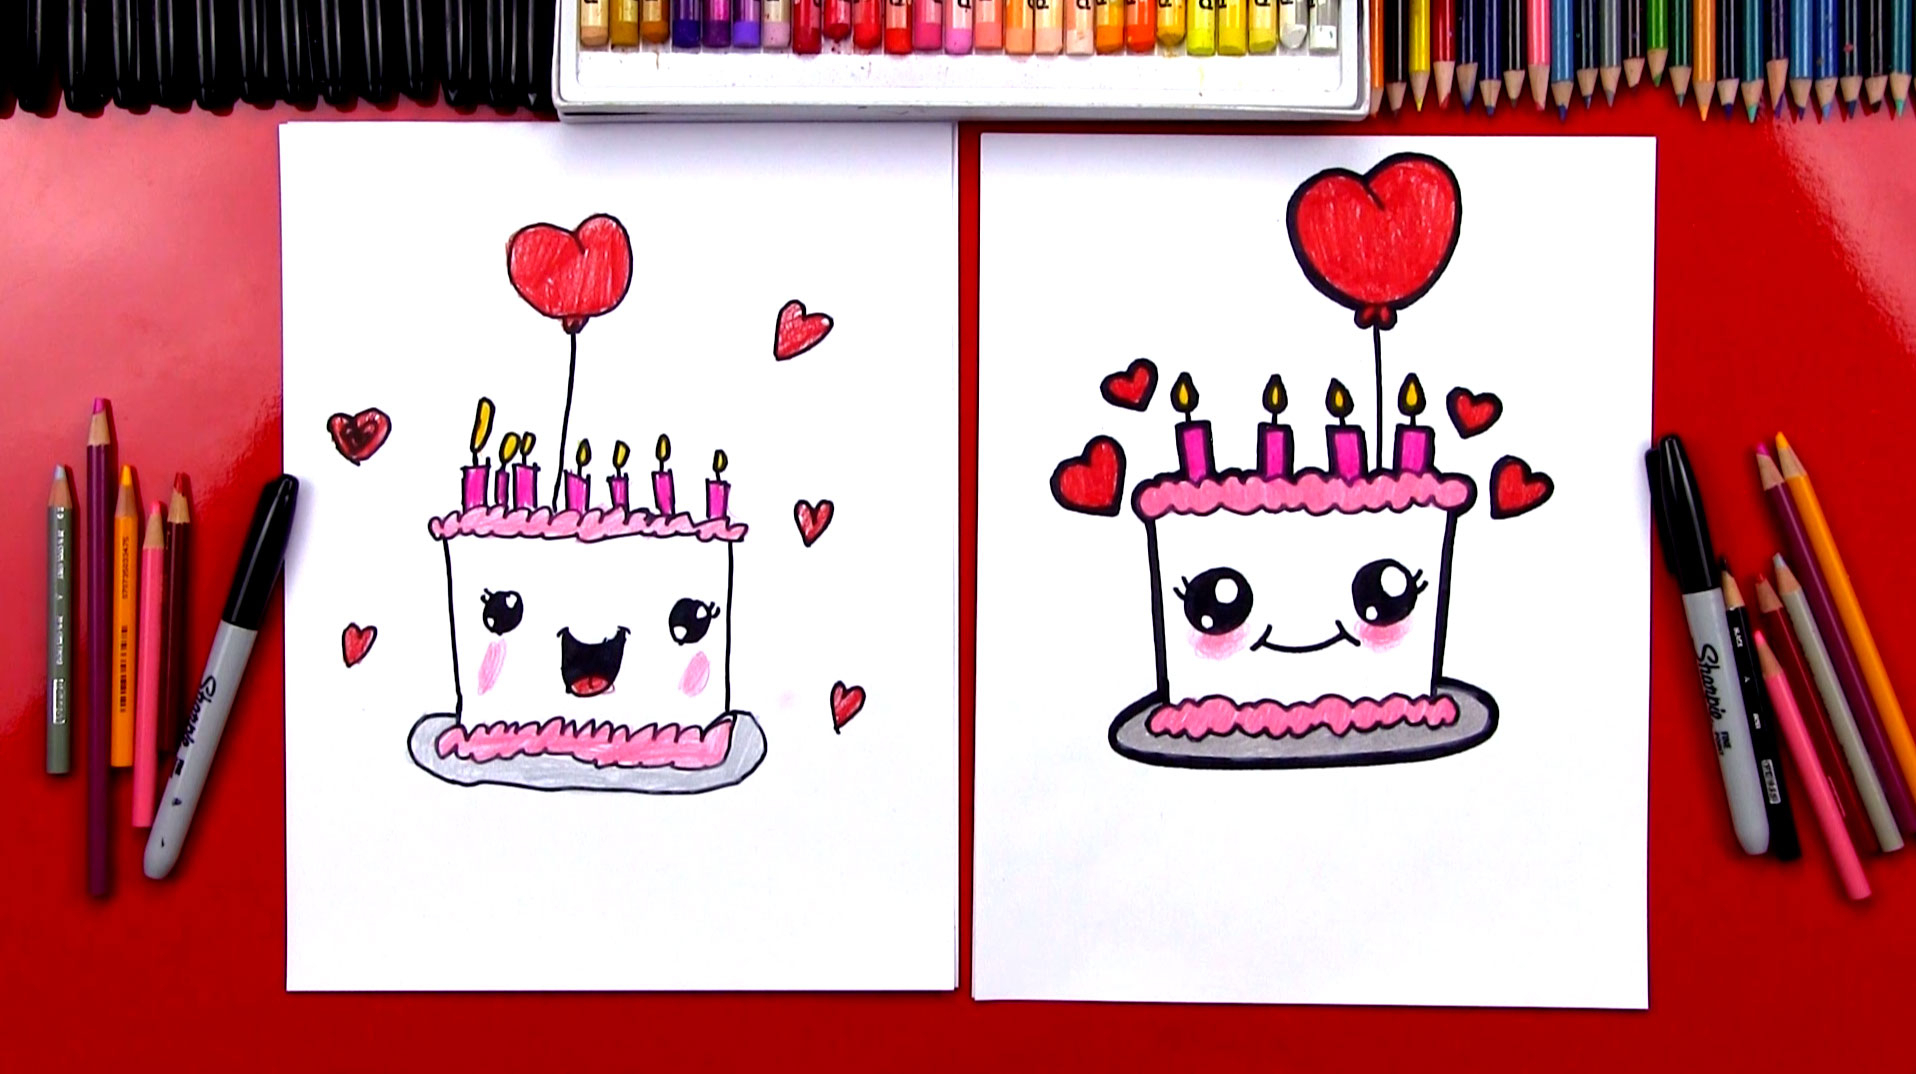 Как how to drawing a Birthday Cake, dpfunkids